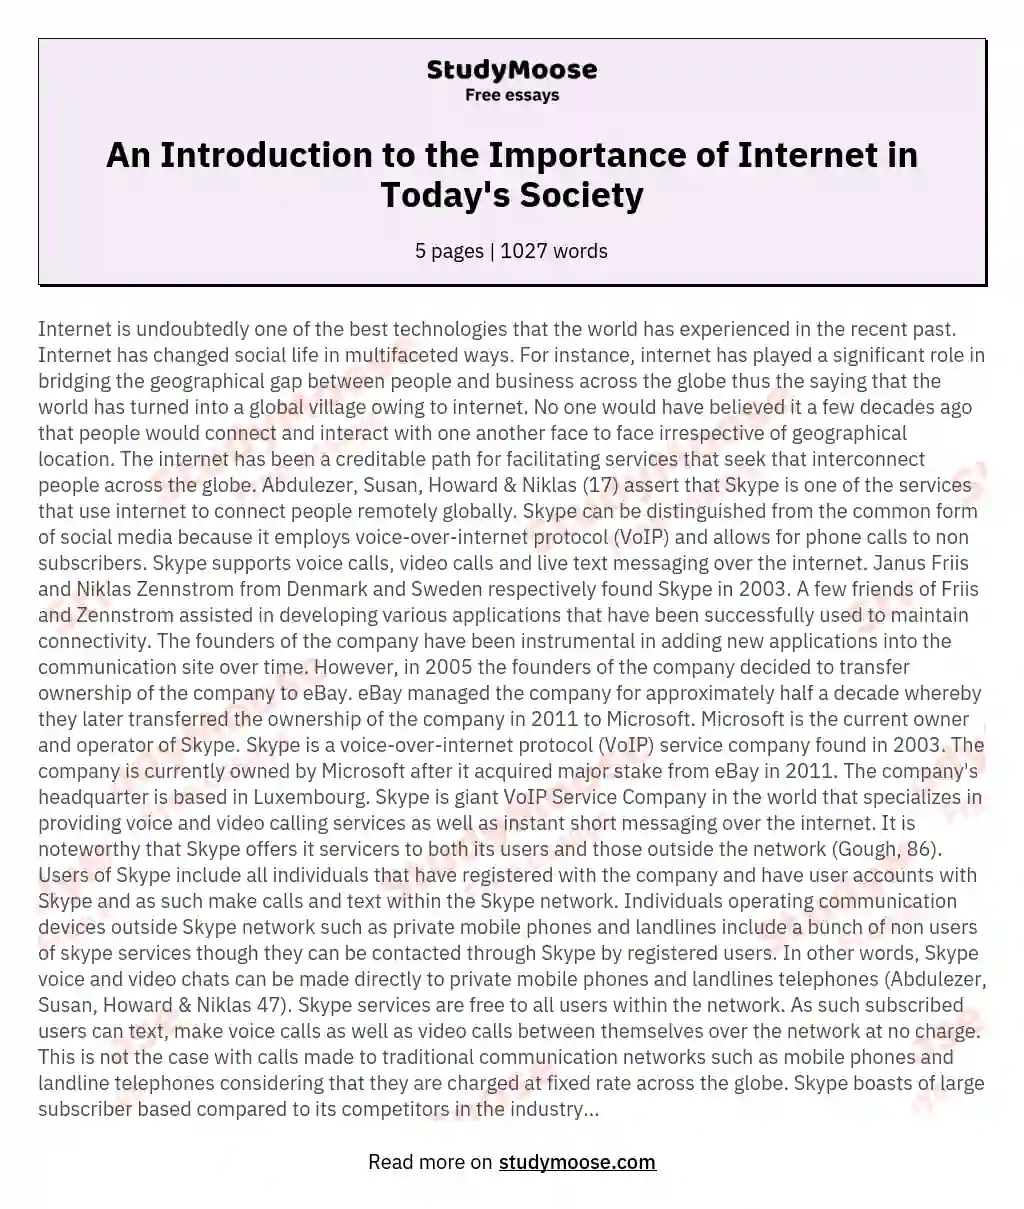 An Introduction to the Importance of Internet in Today's Society essay